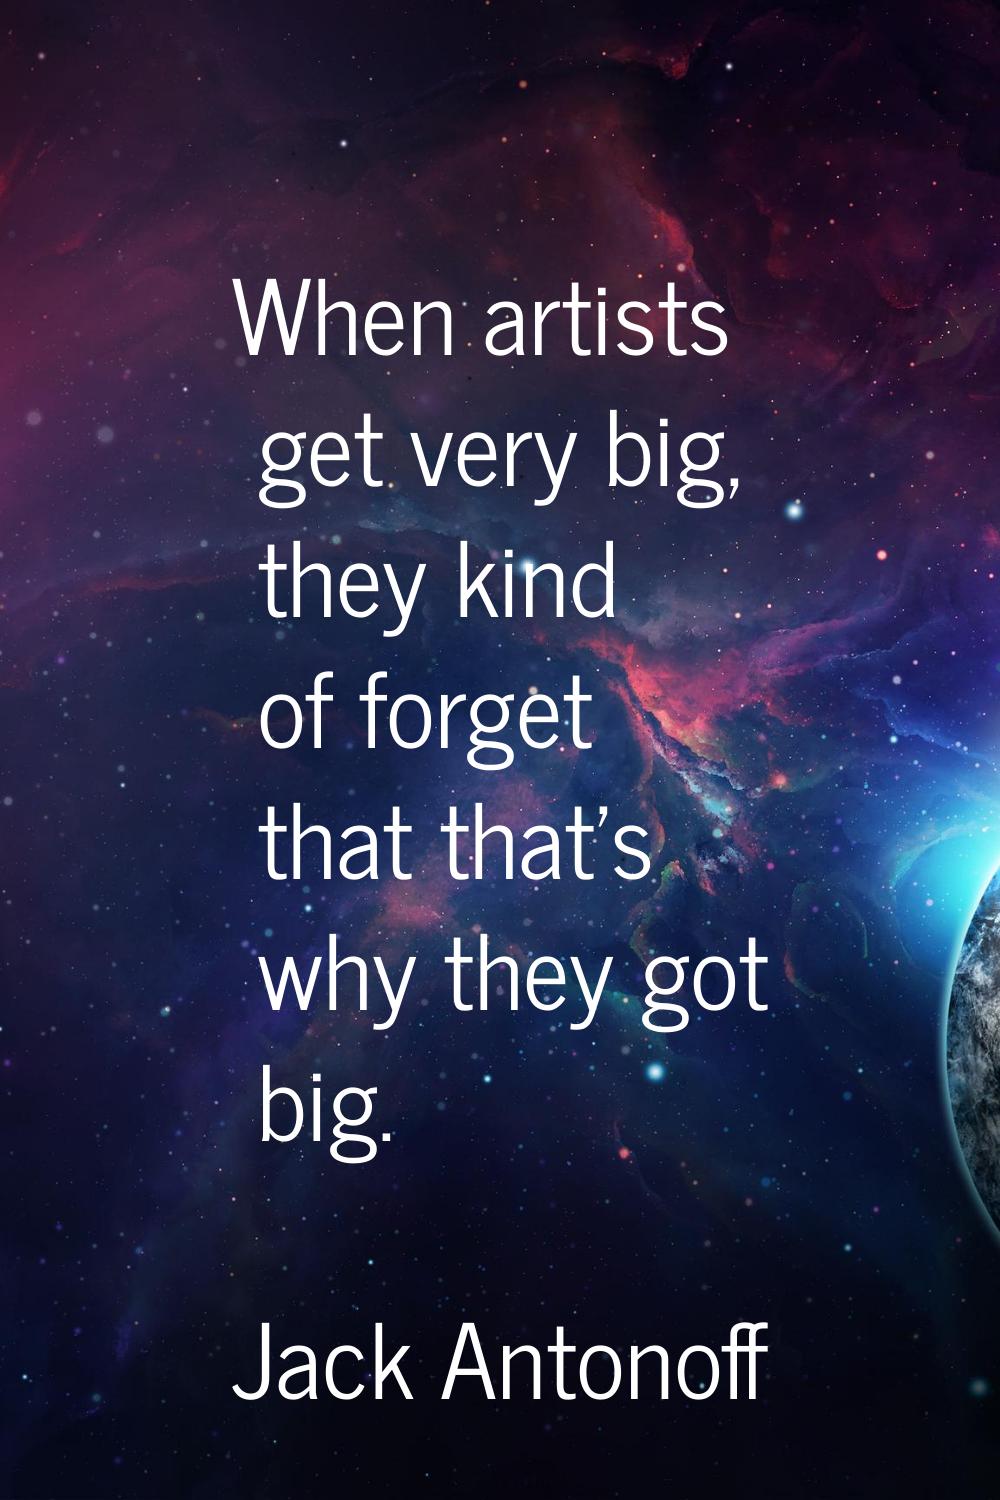 When artists get very big, they kind of forget that that's why they got big.